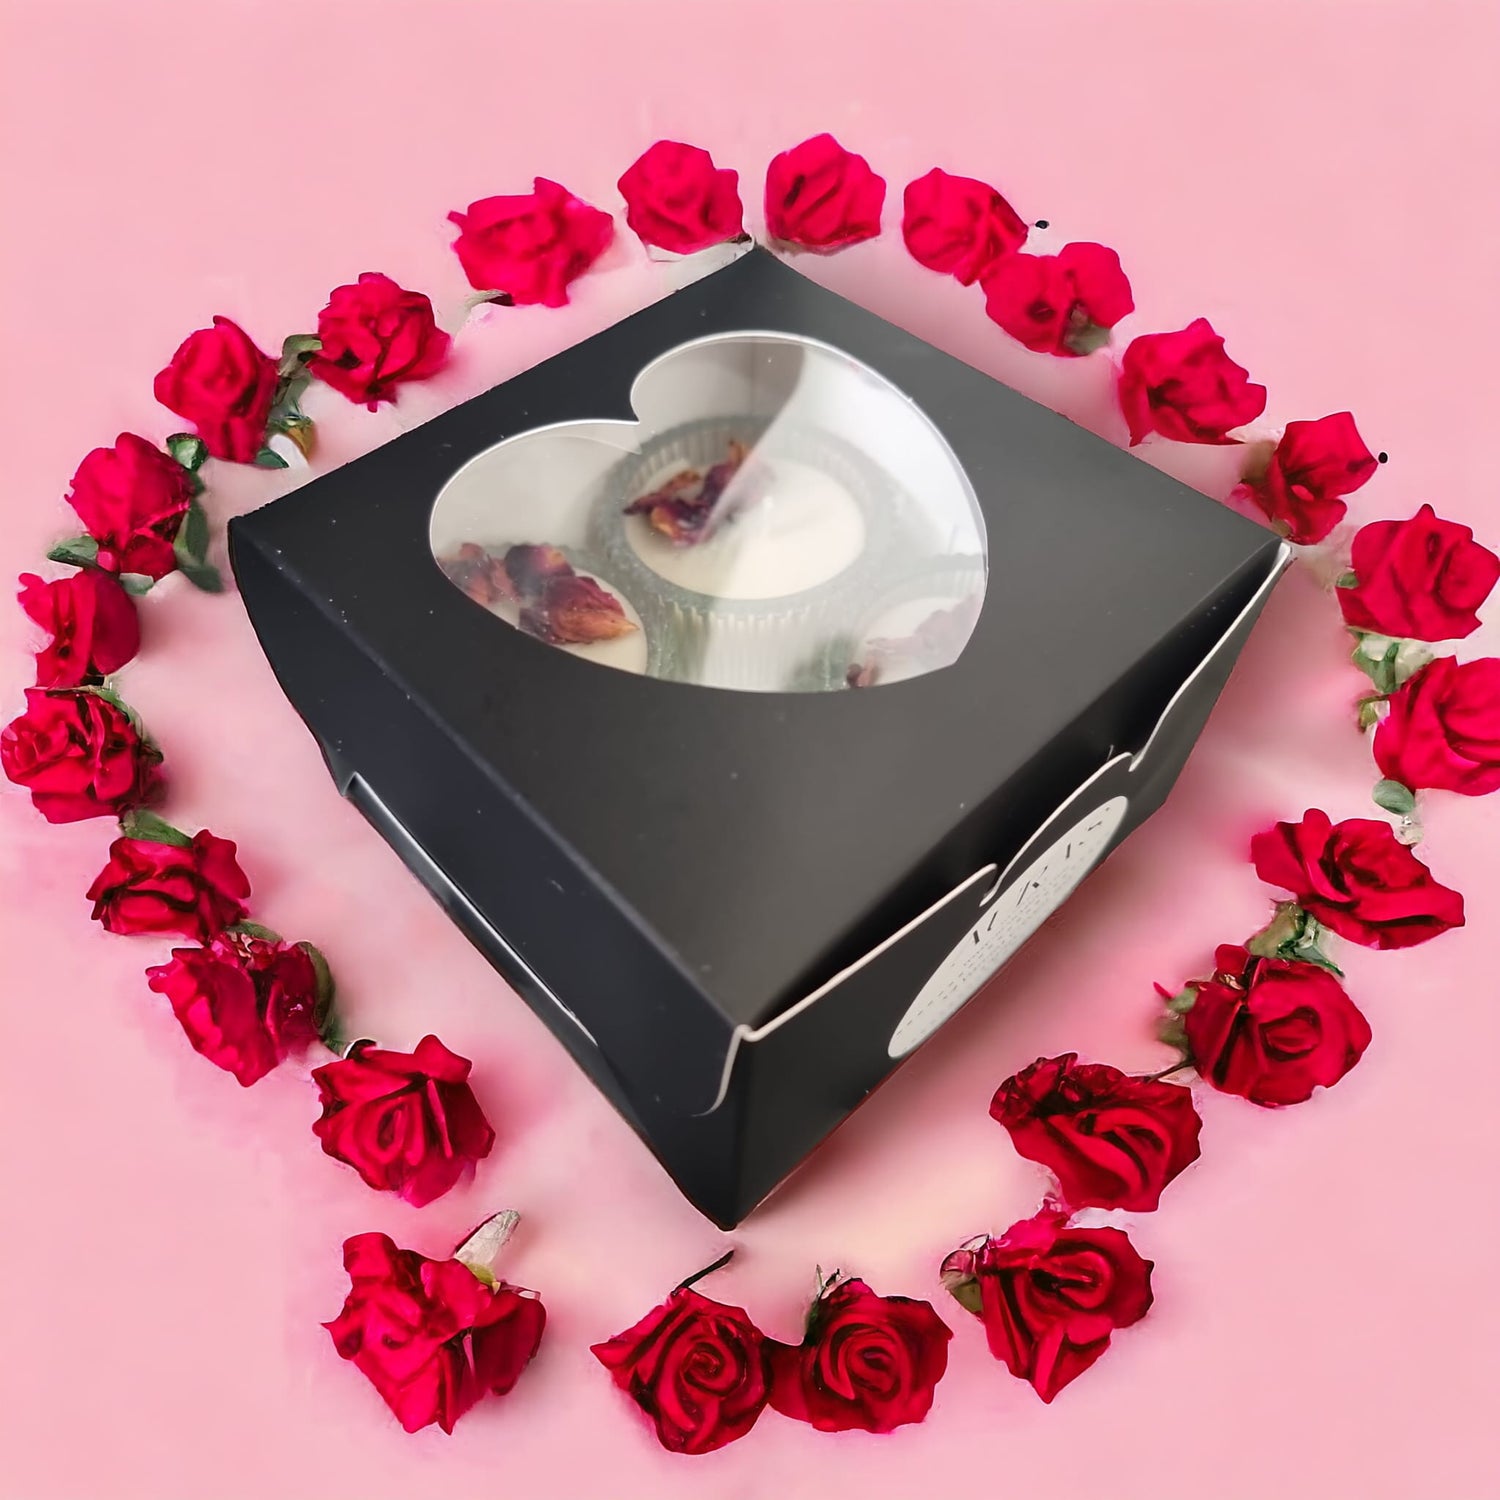 Gift Set - Heart-Shaped Tealights in Vanilla Cream Scent with Rose Petals, Presented in a Black Box - Auras Workshop  -   -   - Cyprus & Greece